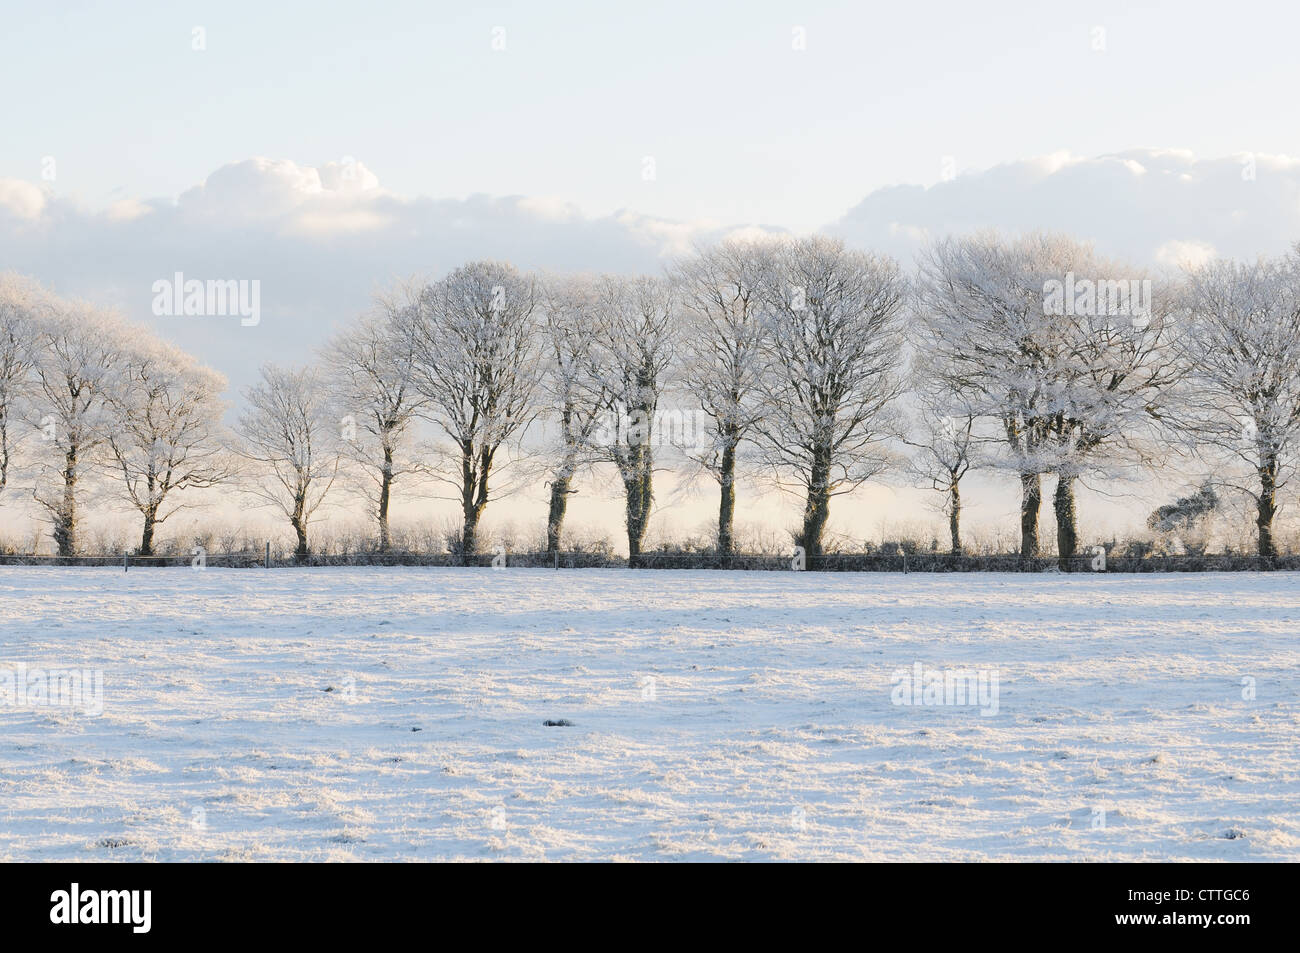 A row of Beech trees covered in snow, Slane, County Meath, Ireland Stock Photo